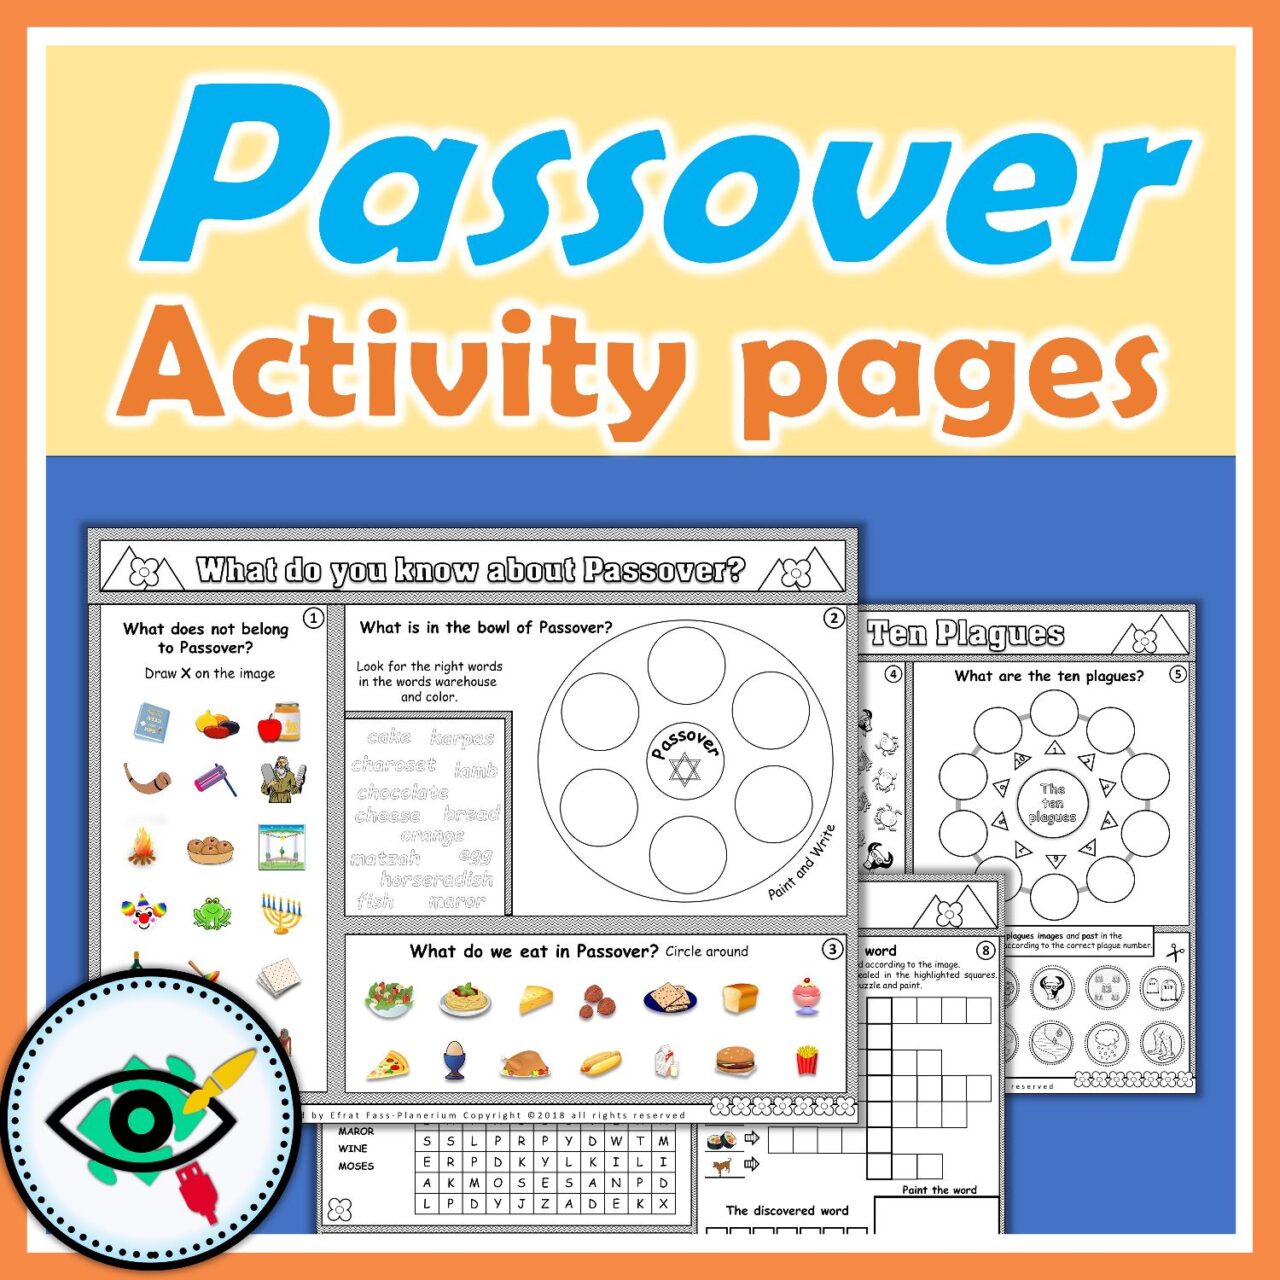 Passover Activity Pages for Kids | Planerium